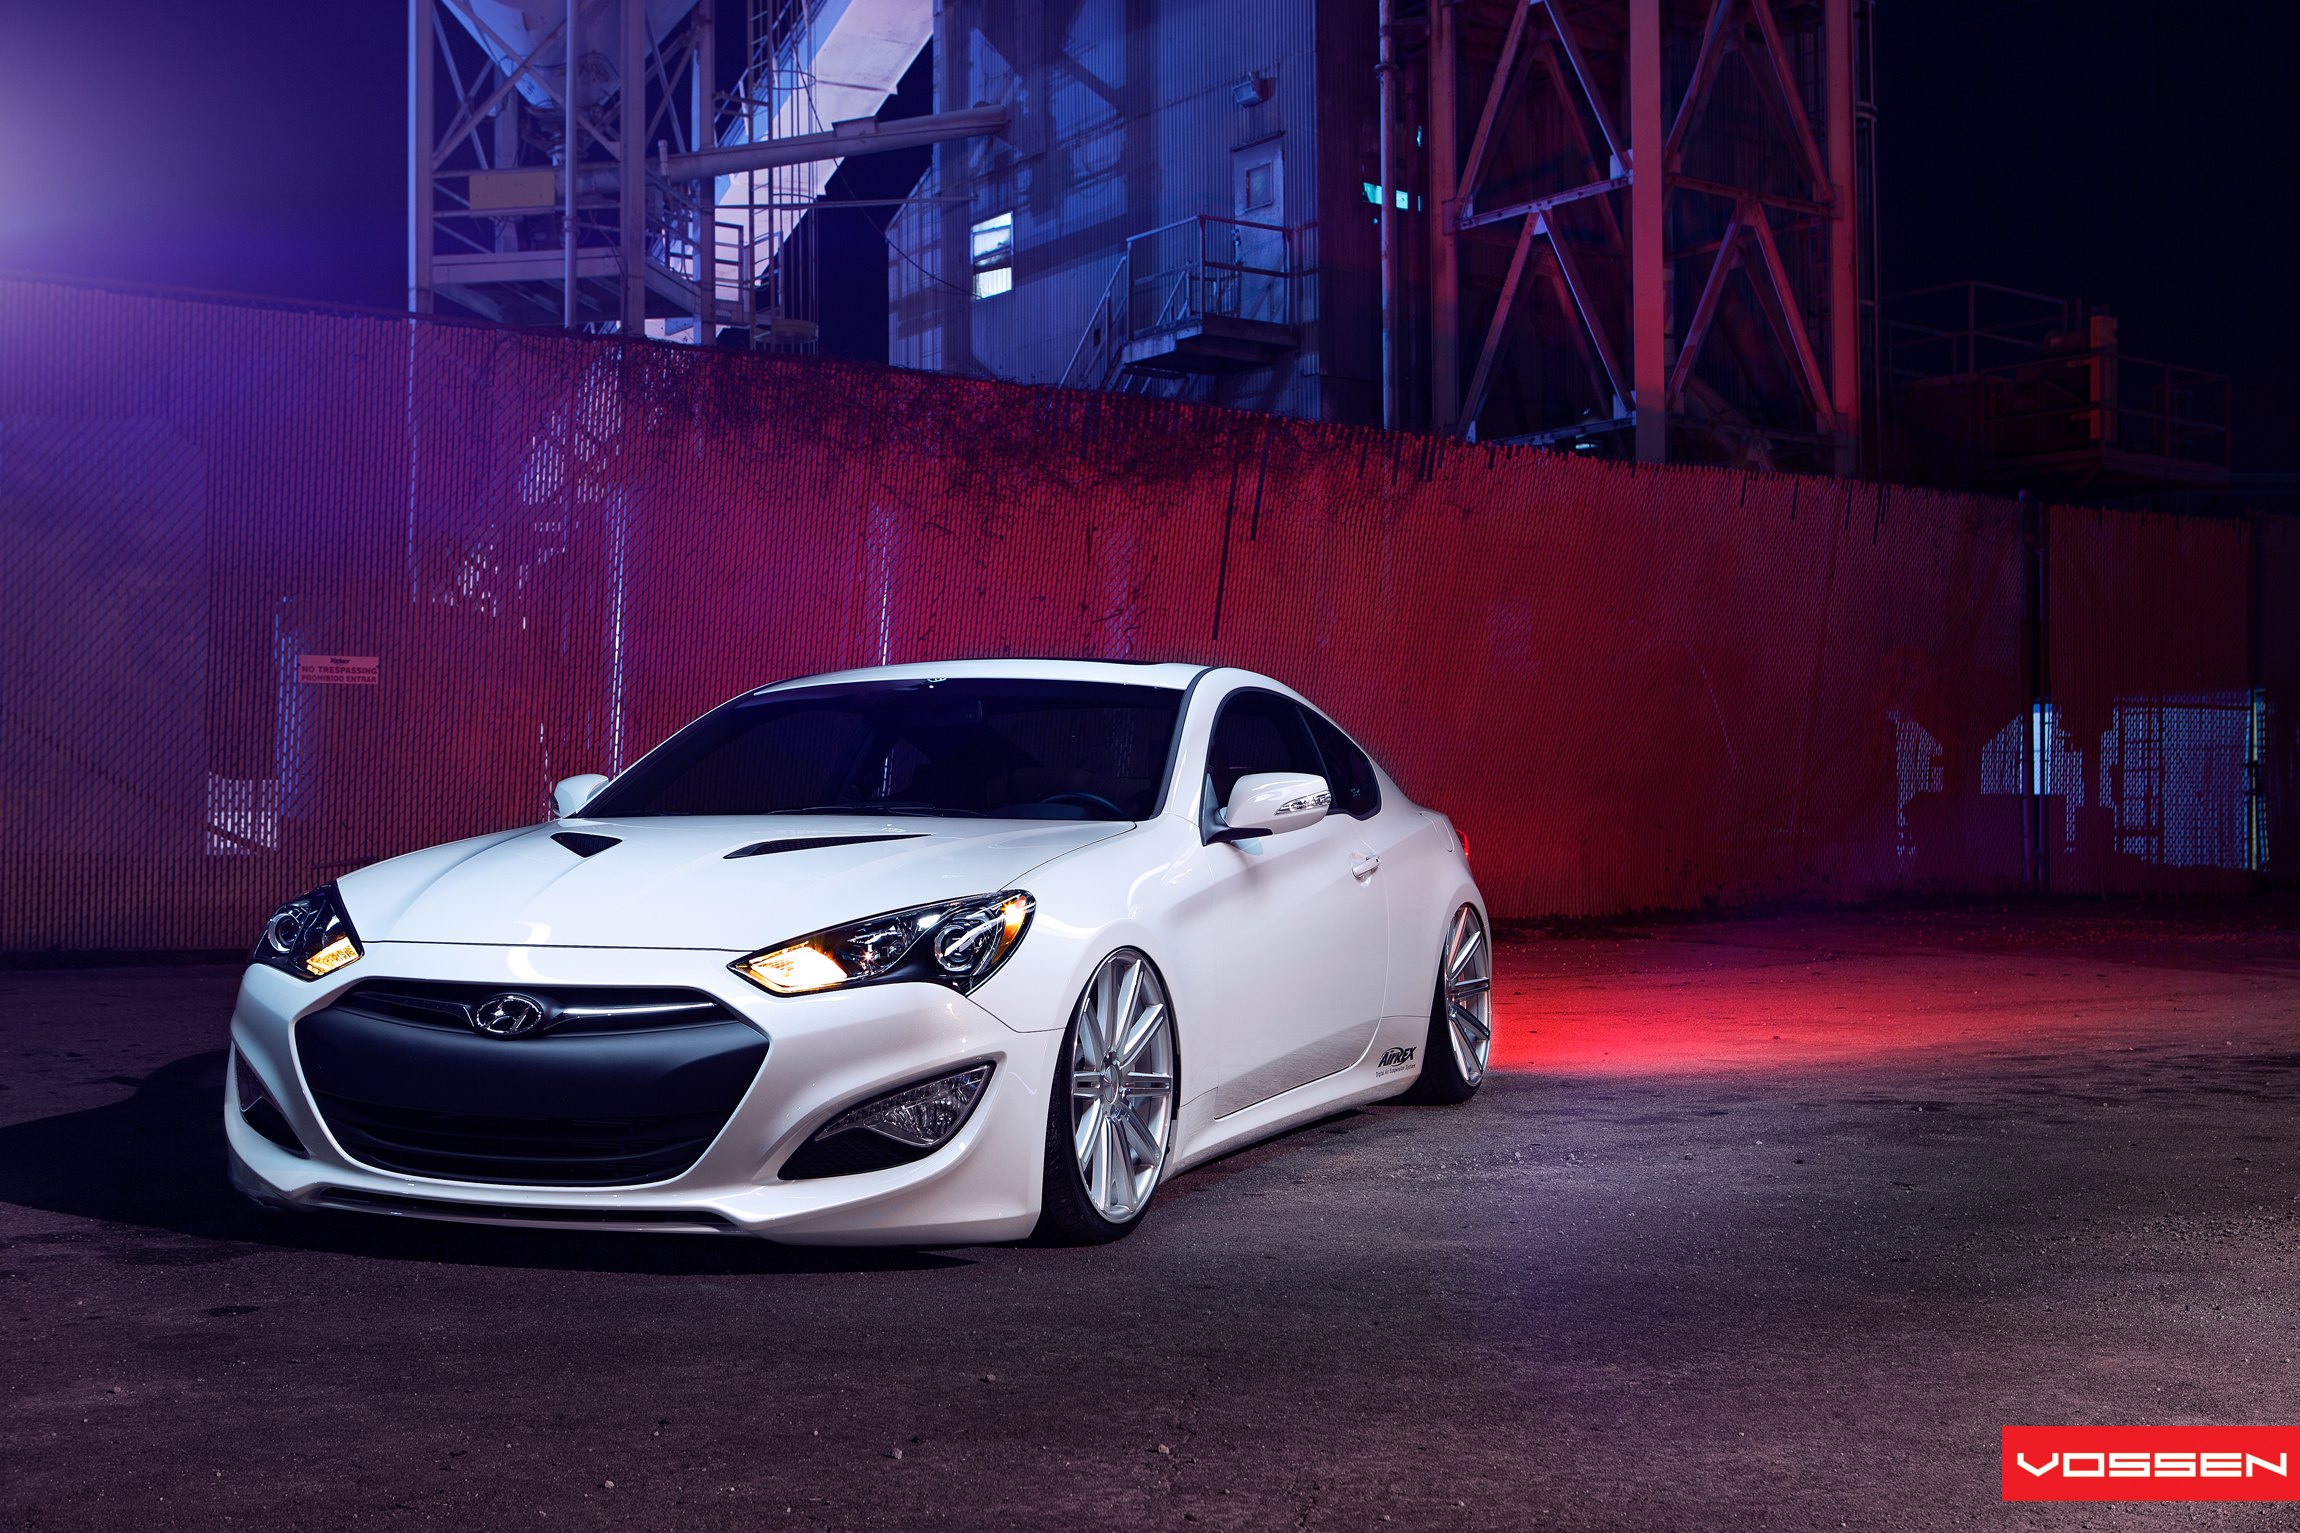 White Stanced Hyundai Genesis Coupe with Custom Body Kit - Photo by Vossen